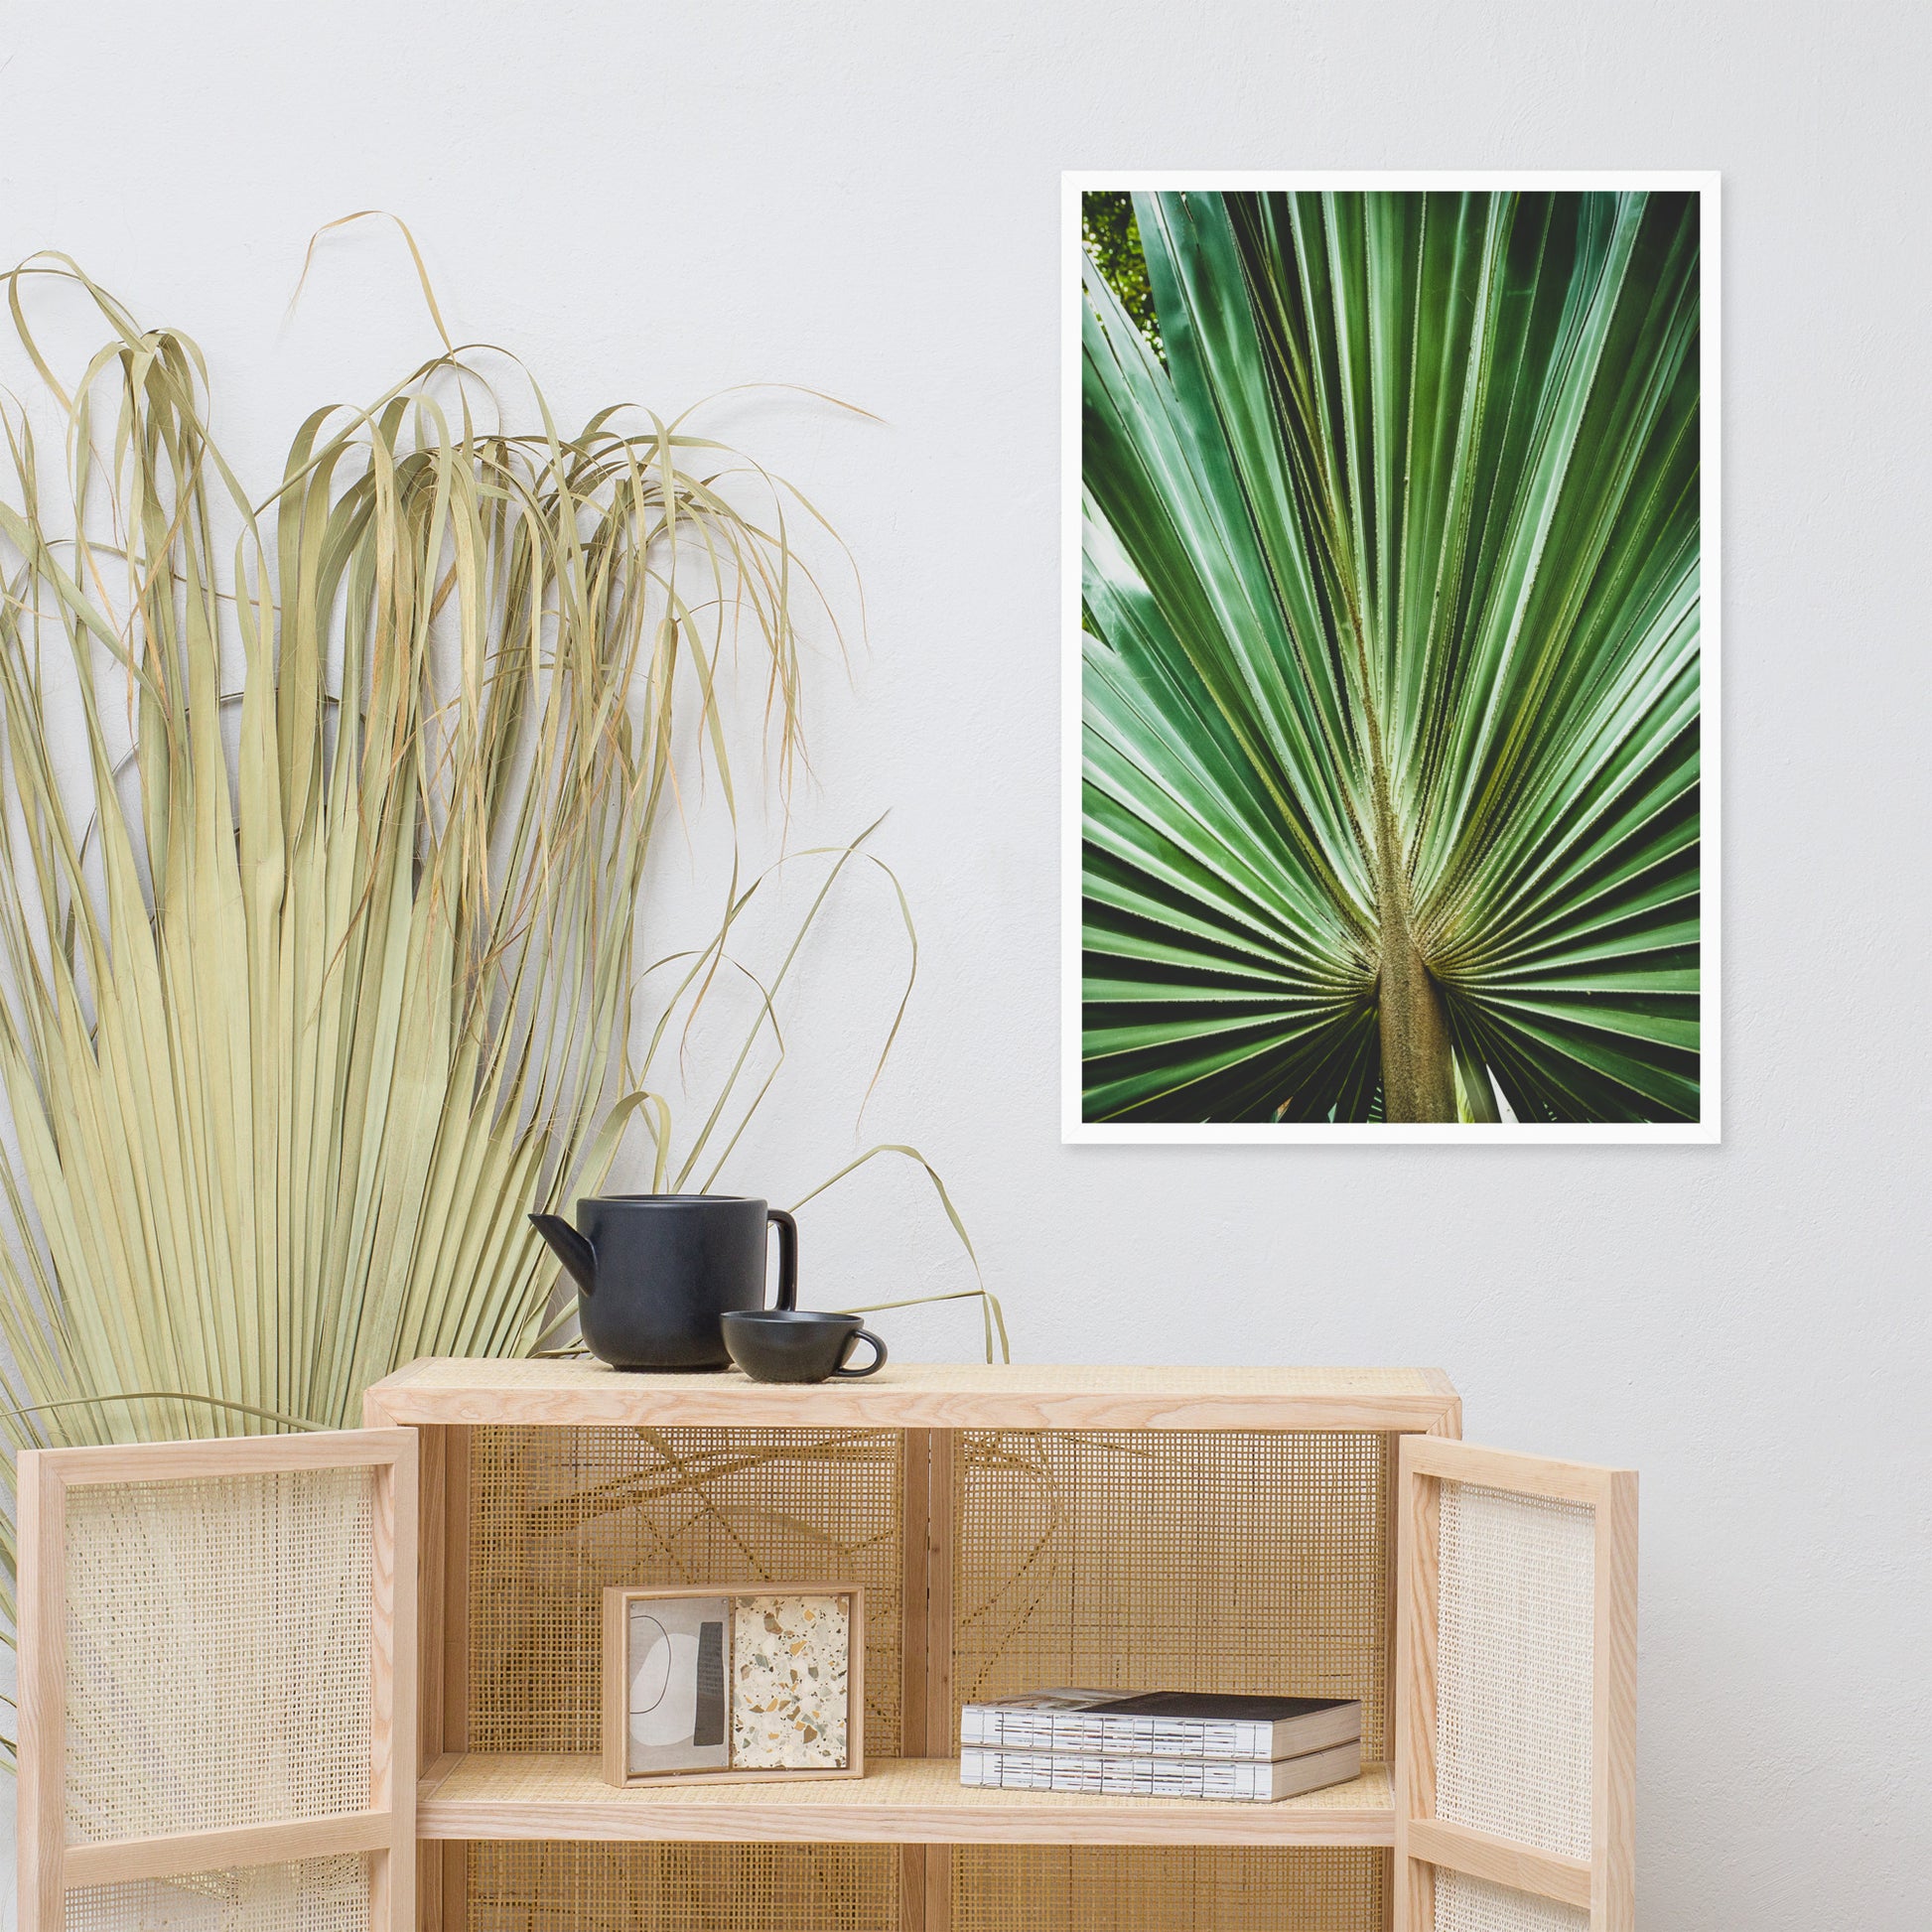 Casual Dining Room Wall Decor: Aged and Colorized Wide Palm Leaves 2 Tropical Botanical / Nature Photo Framed Wall Art Print - Artwork - Wall Decor